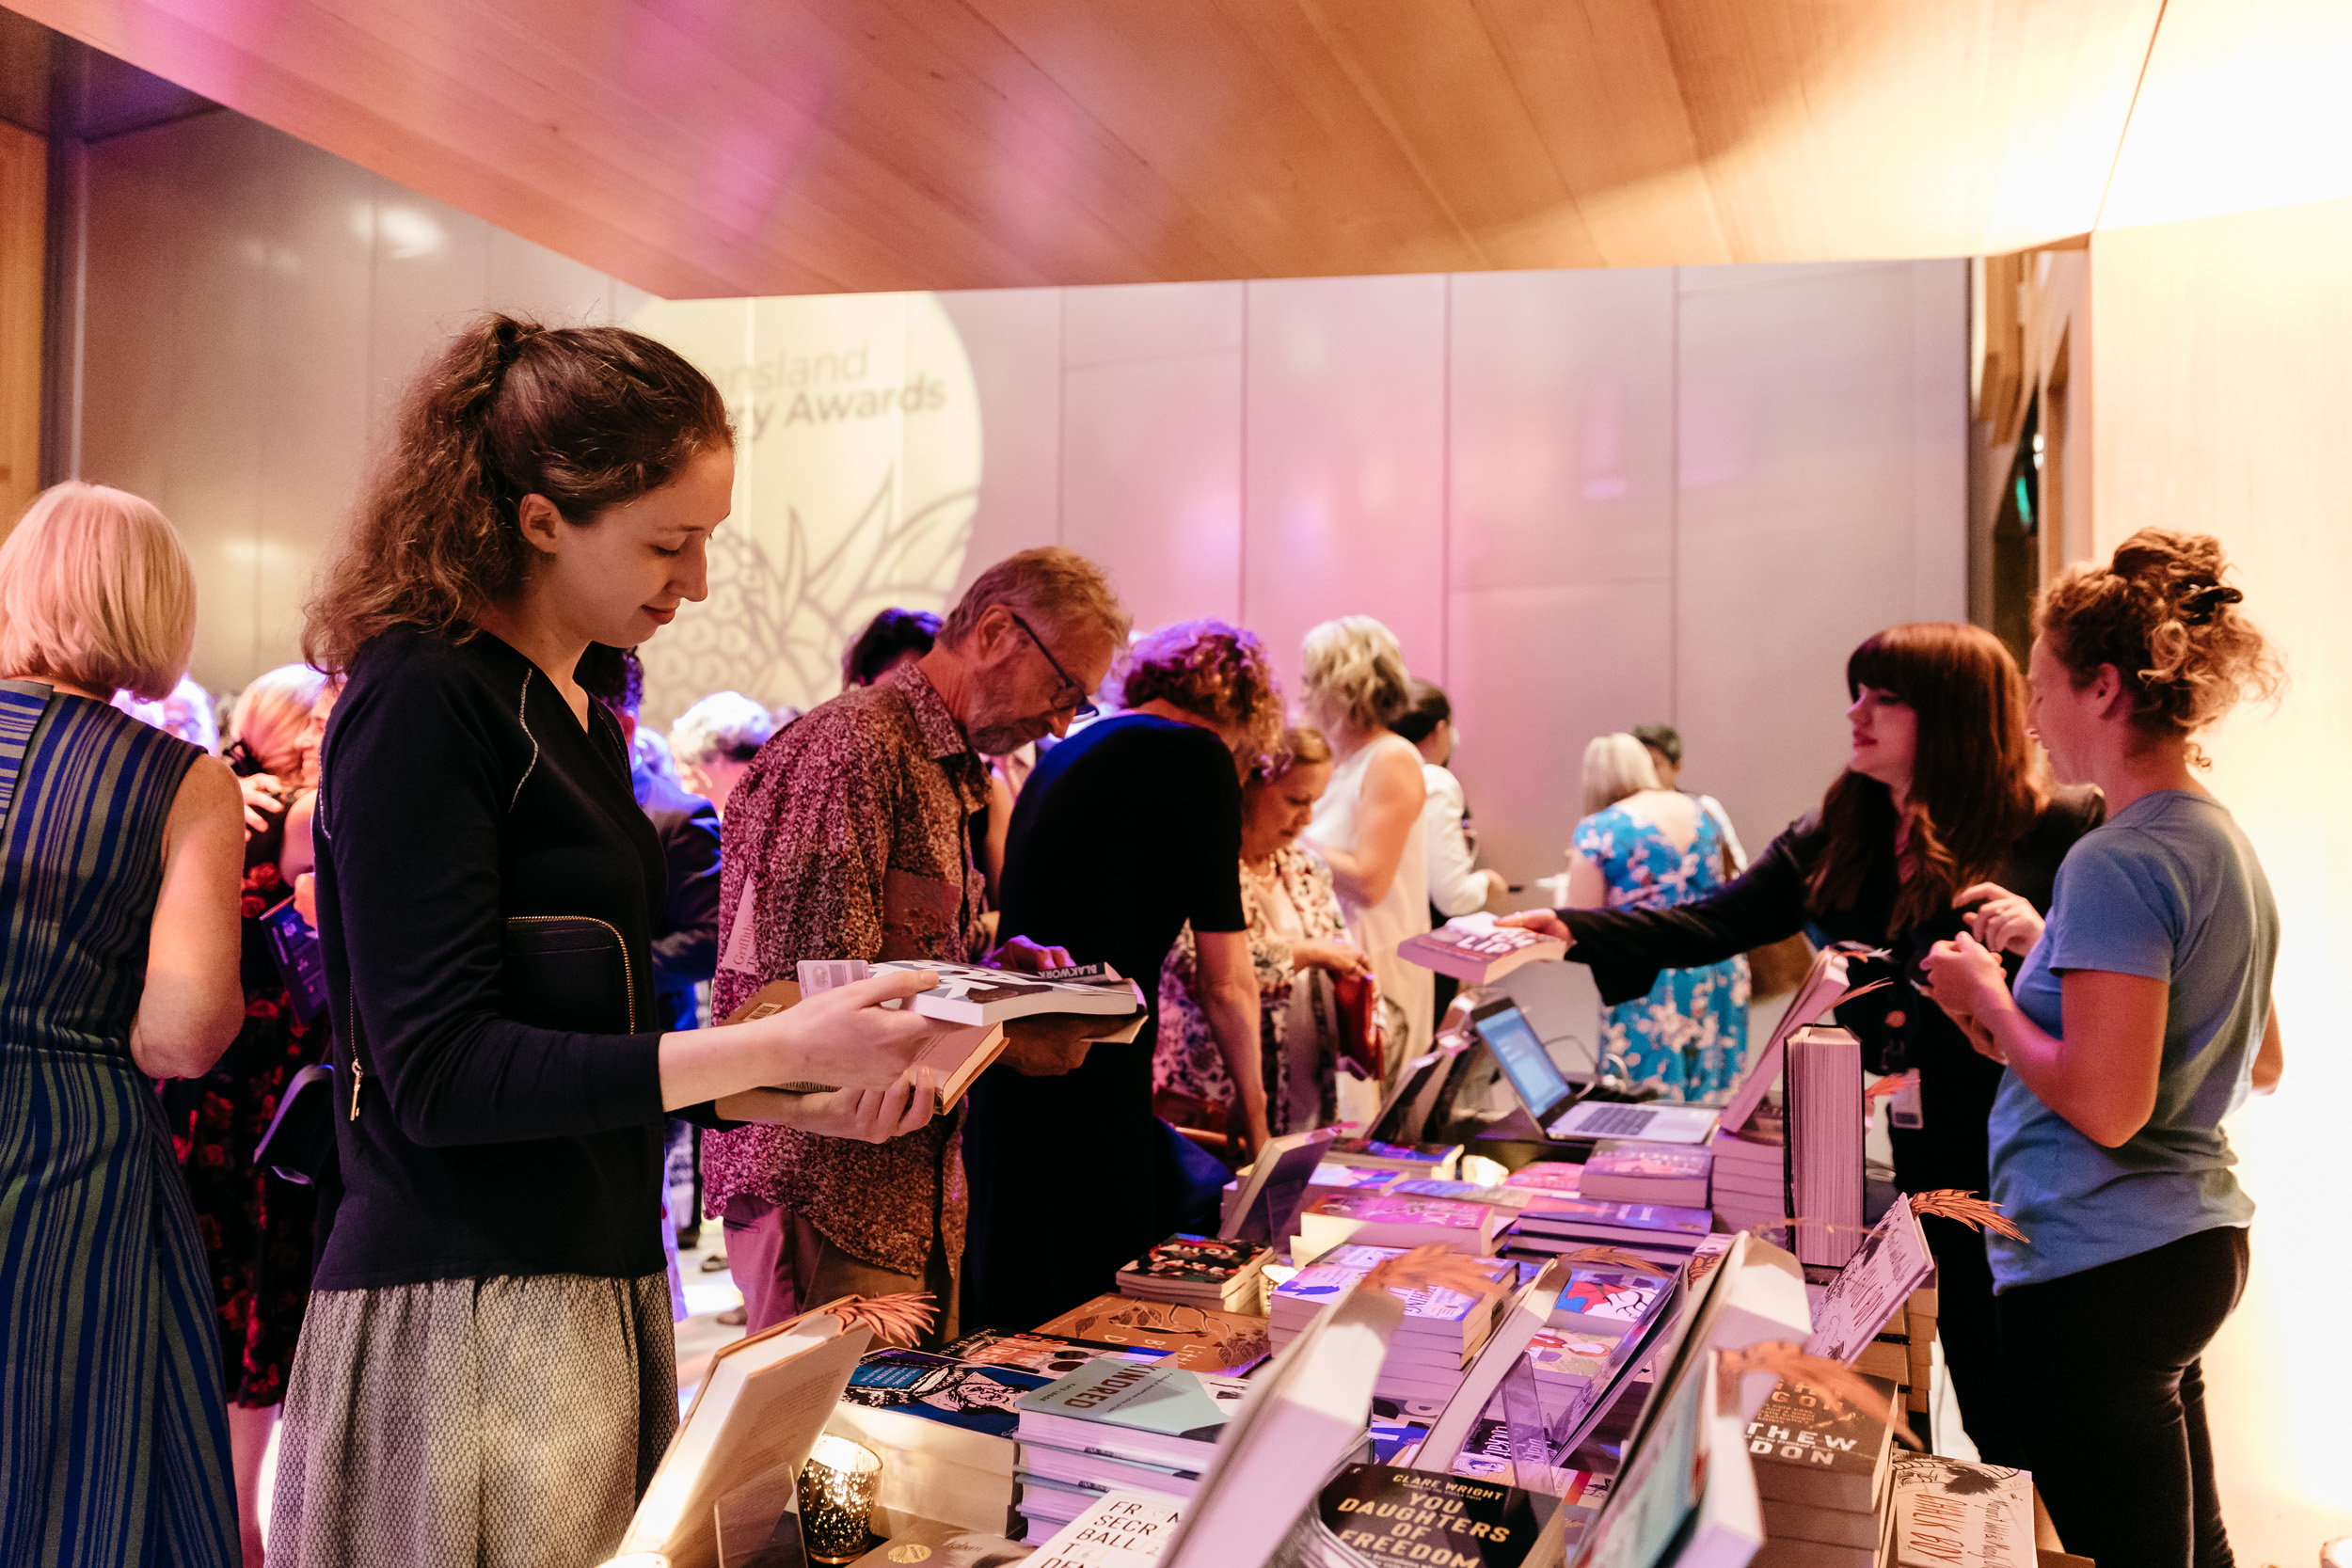 People browsing books at Queensland Literary Awards 2019